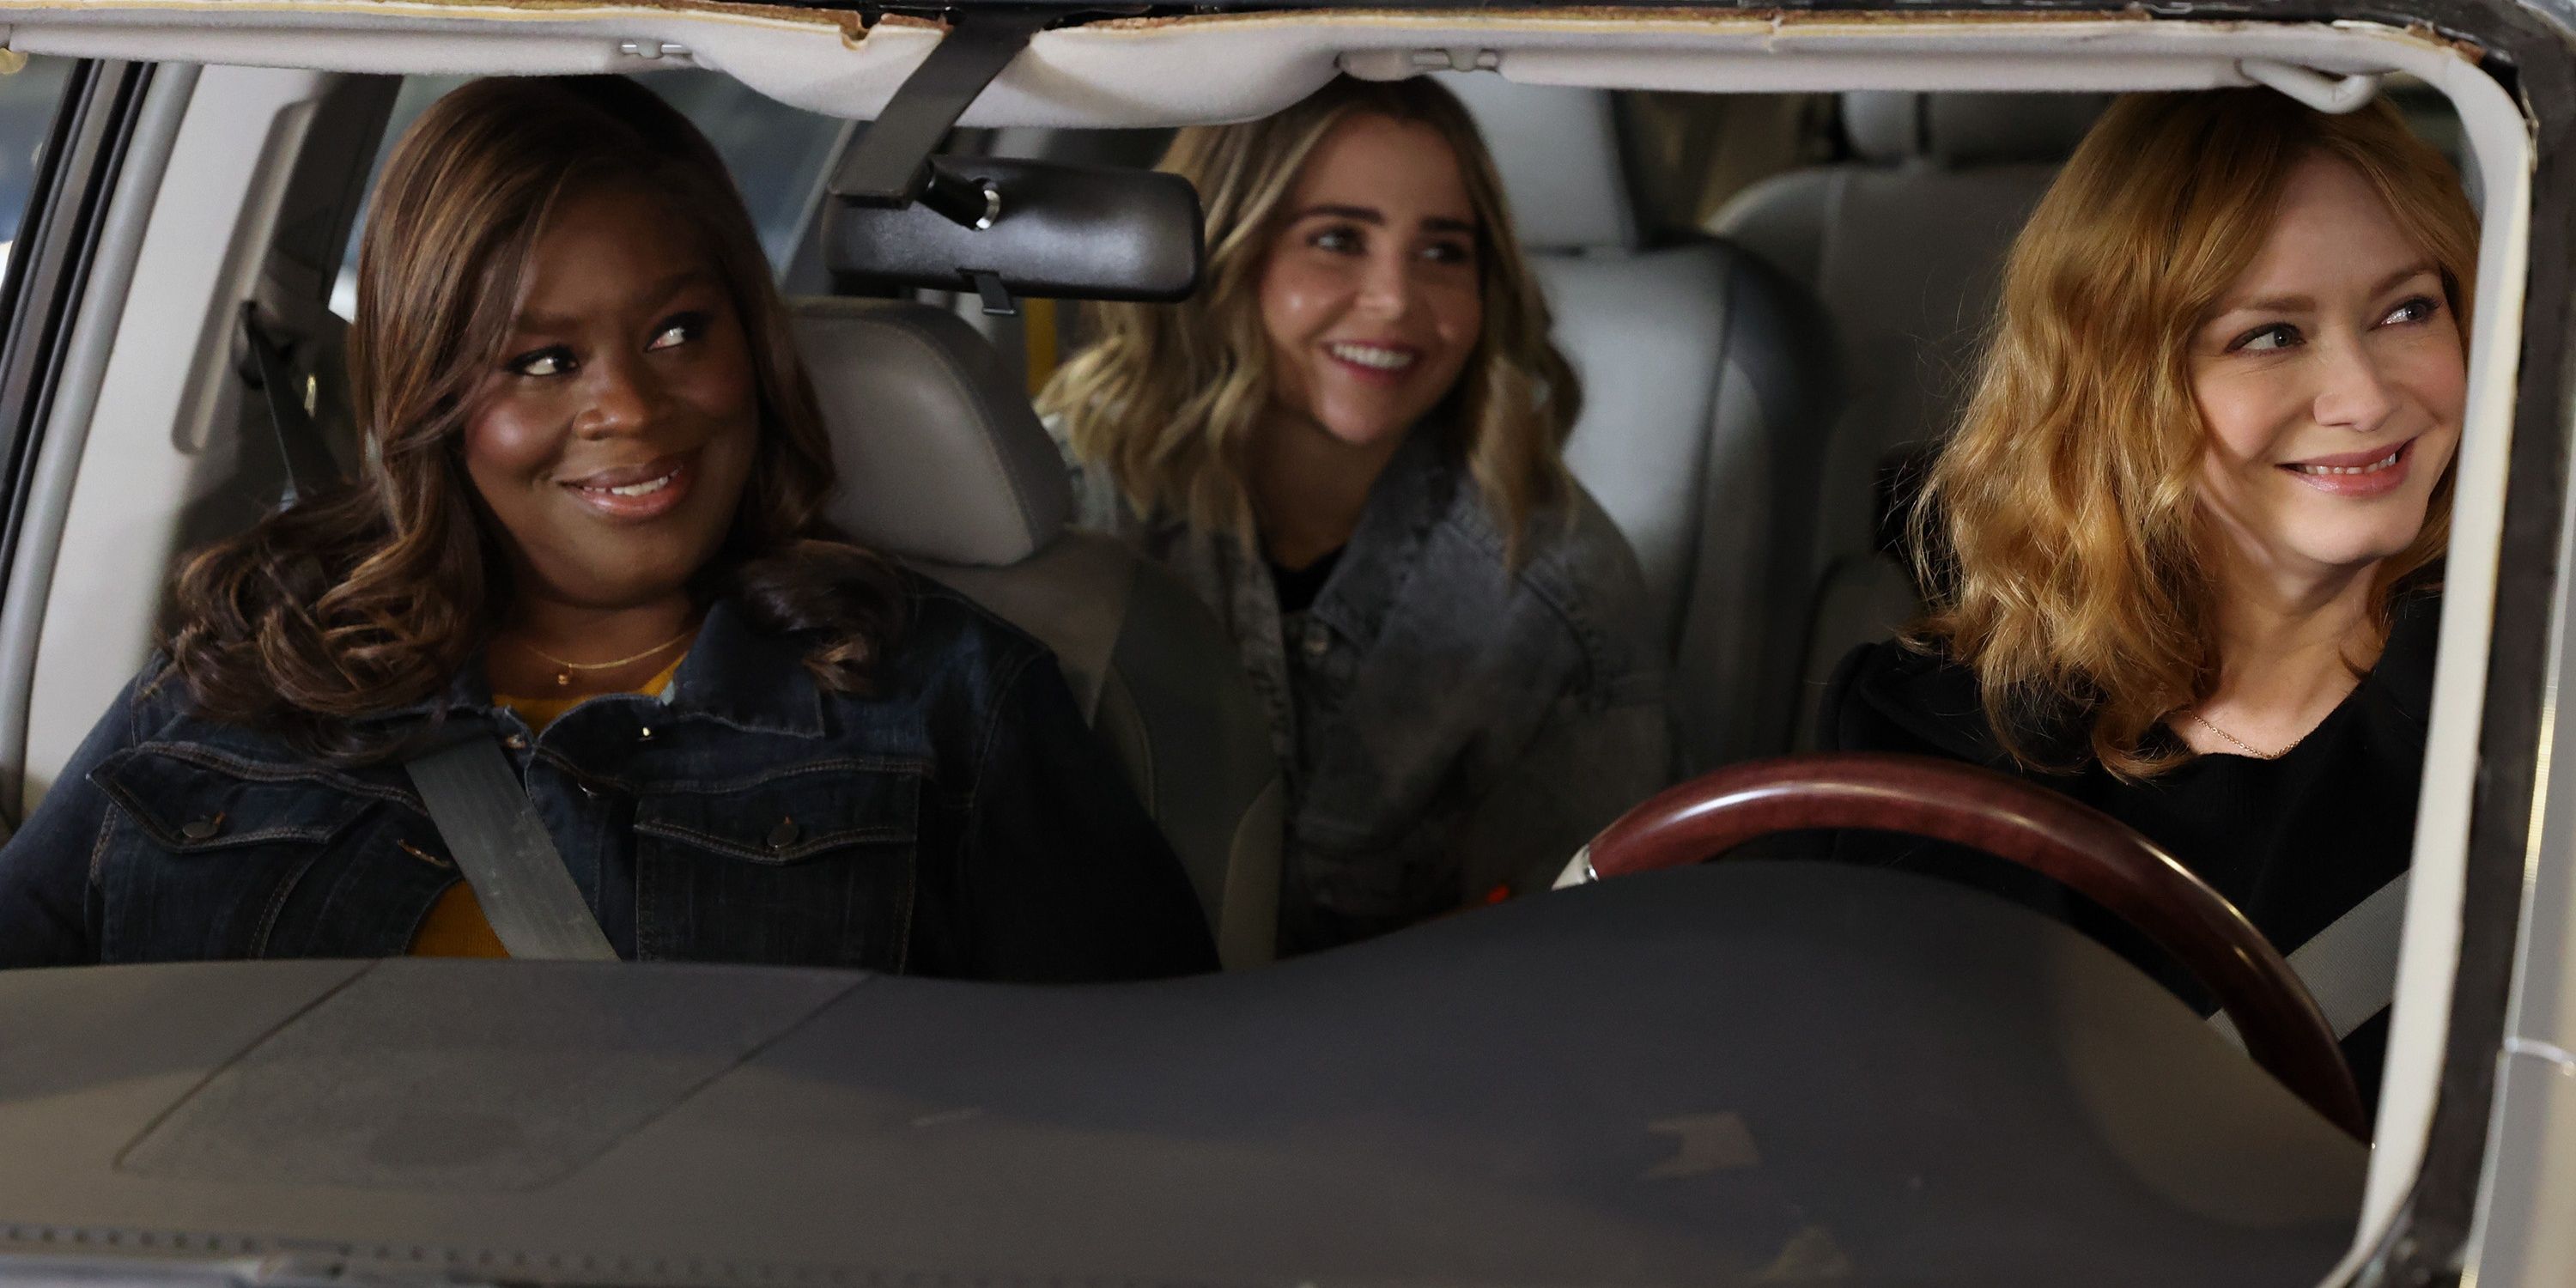 The trio dismisses Stan's concerns and vows to stick together in Good Girls